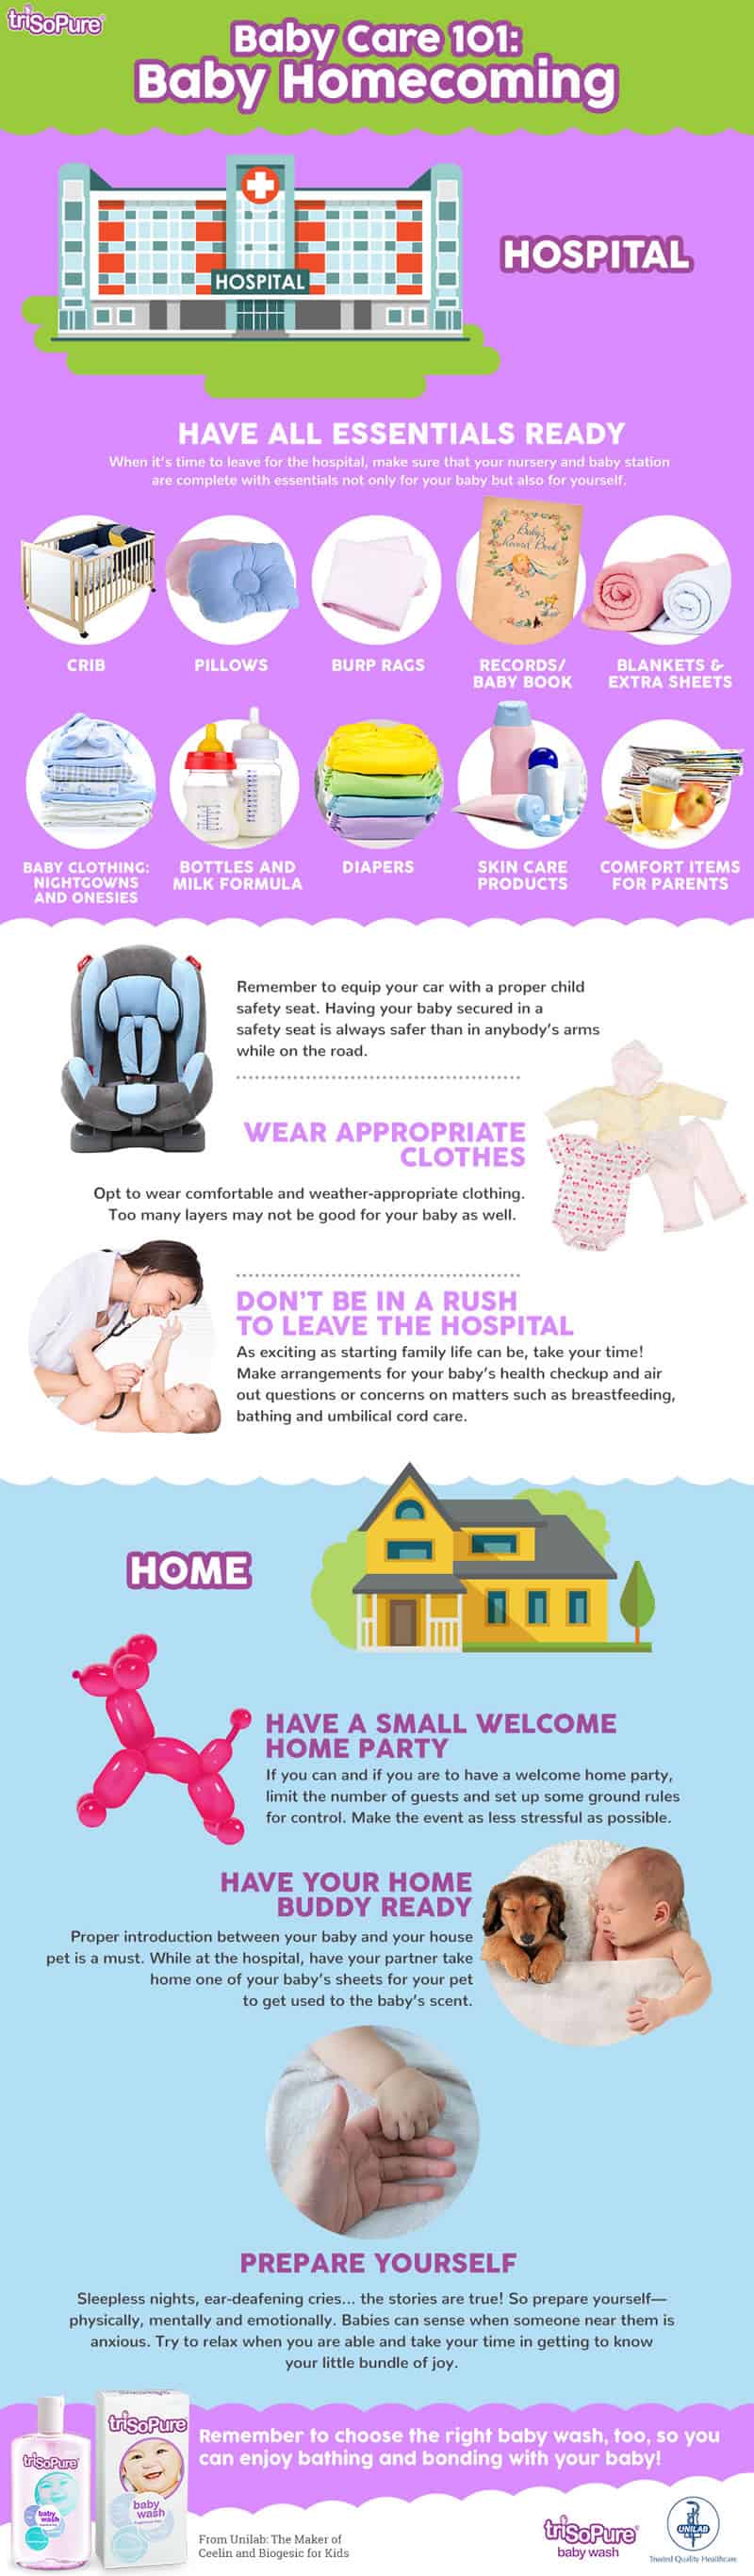 How to prepare baby Home Coming